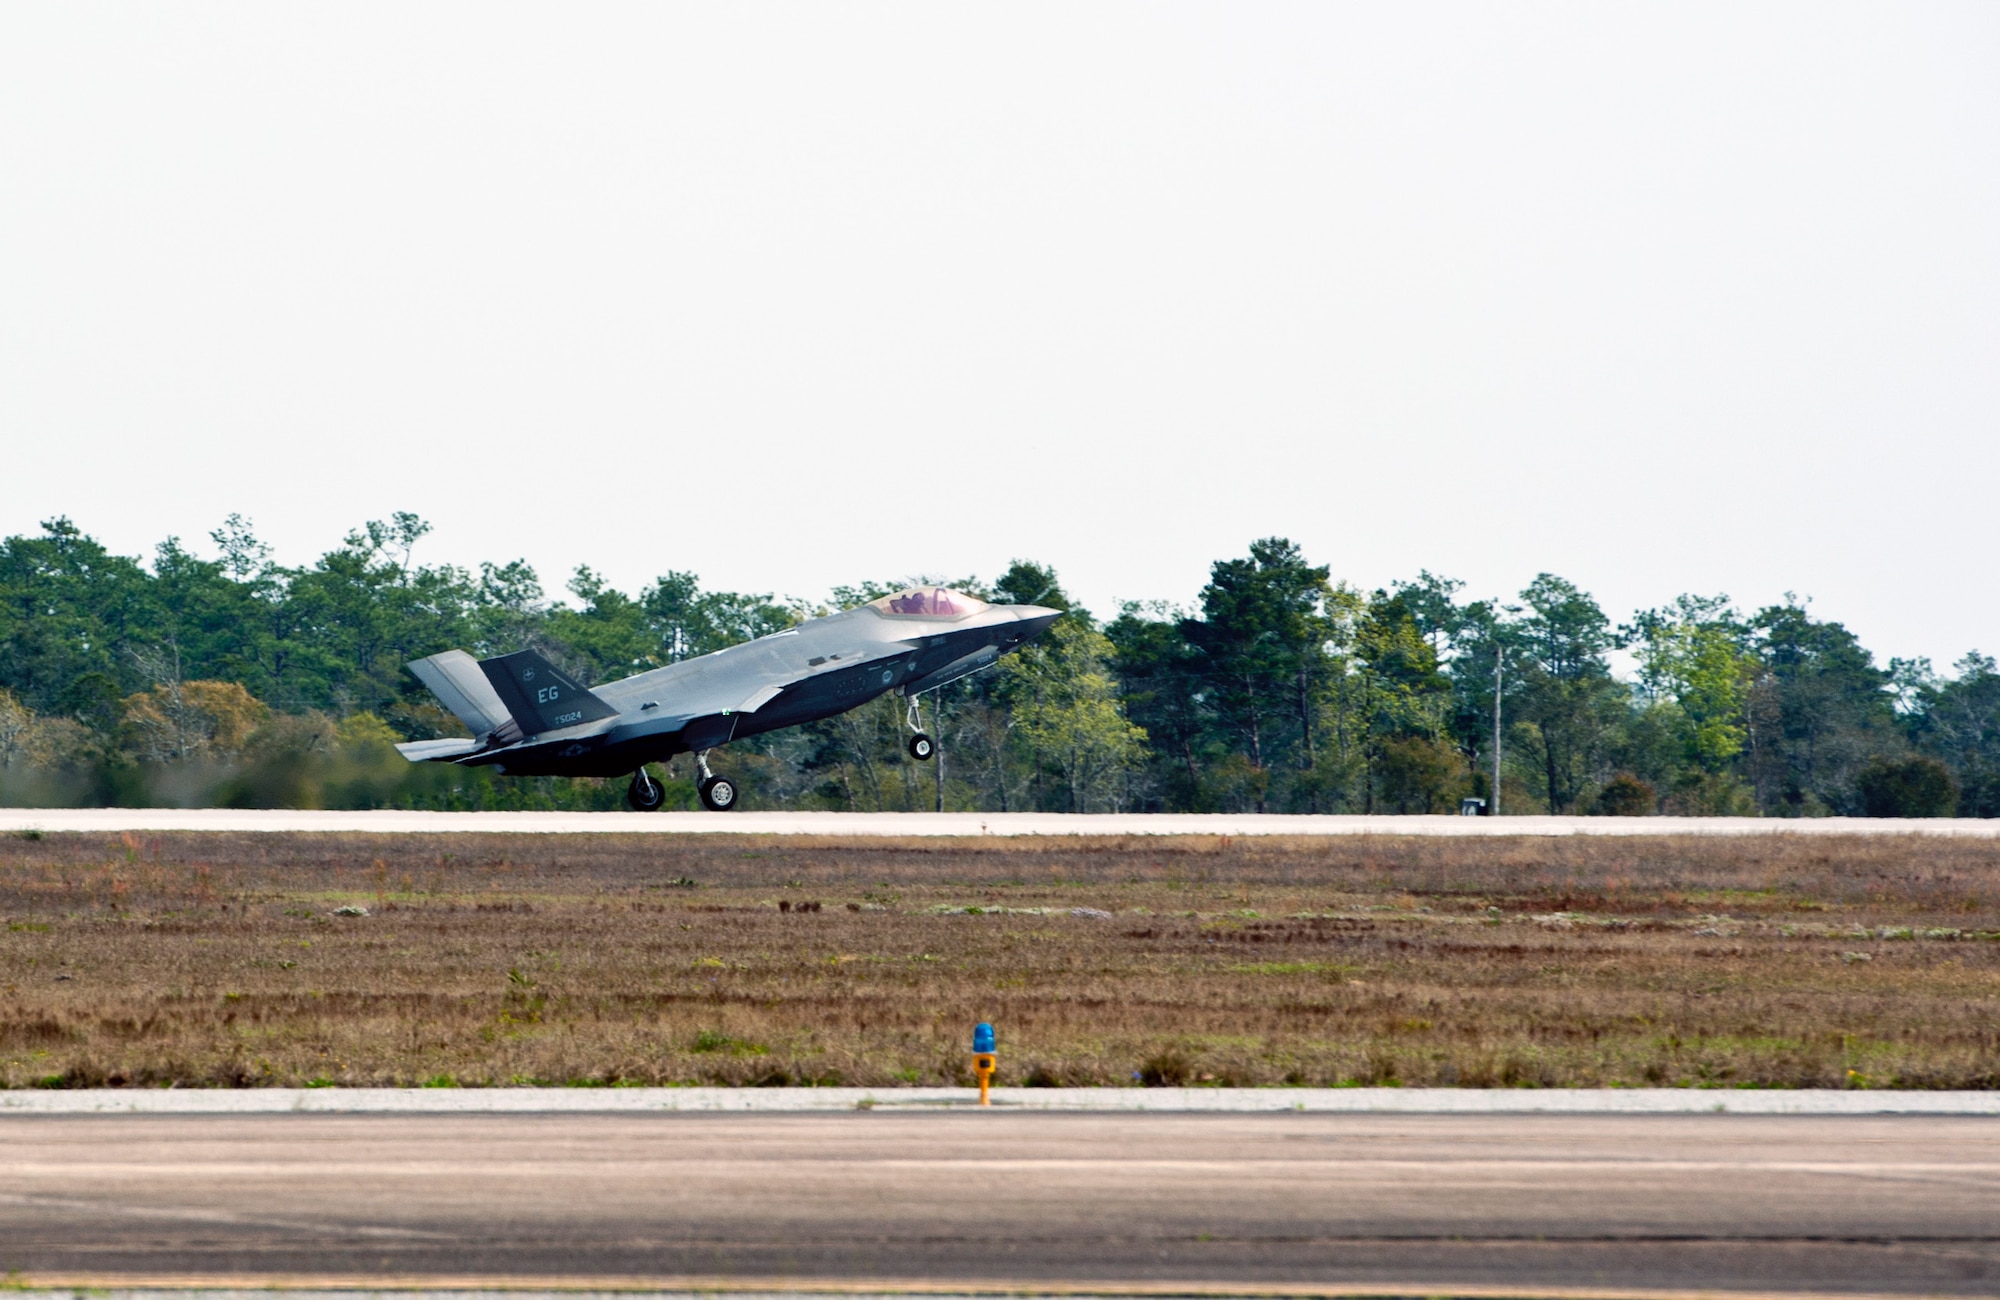 Royal Australian Air Force Squadron Leader Andrew Jackson, F-35 Lightning II student pilot, lands his F-35A after completing his first flight on Eglin Air Force Base, Fla., March 18, 2015. Jackson arrived in the United States in December 2014 and started his training at the F-35 Academic Training Center on Jan. 26, Australia Day. Since then, Jackson has completed 154 classroom hours and 64 hours throughout 16 flight simulations, before stepping to his first aircraft. (U.S. Air Force photo/Staff Sgt. Marleah Robertson)